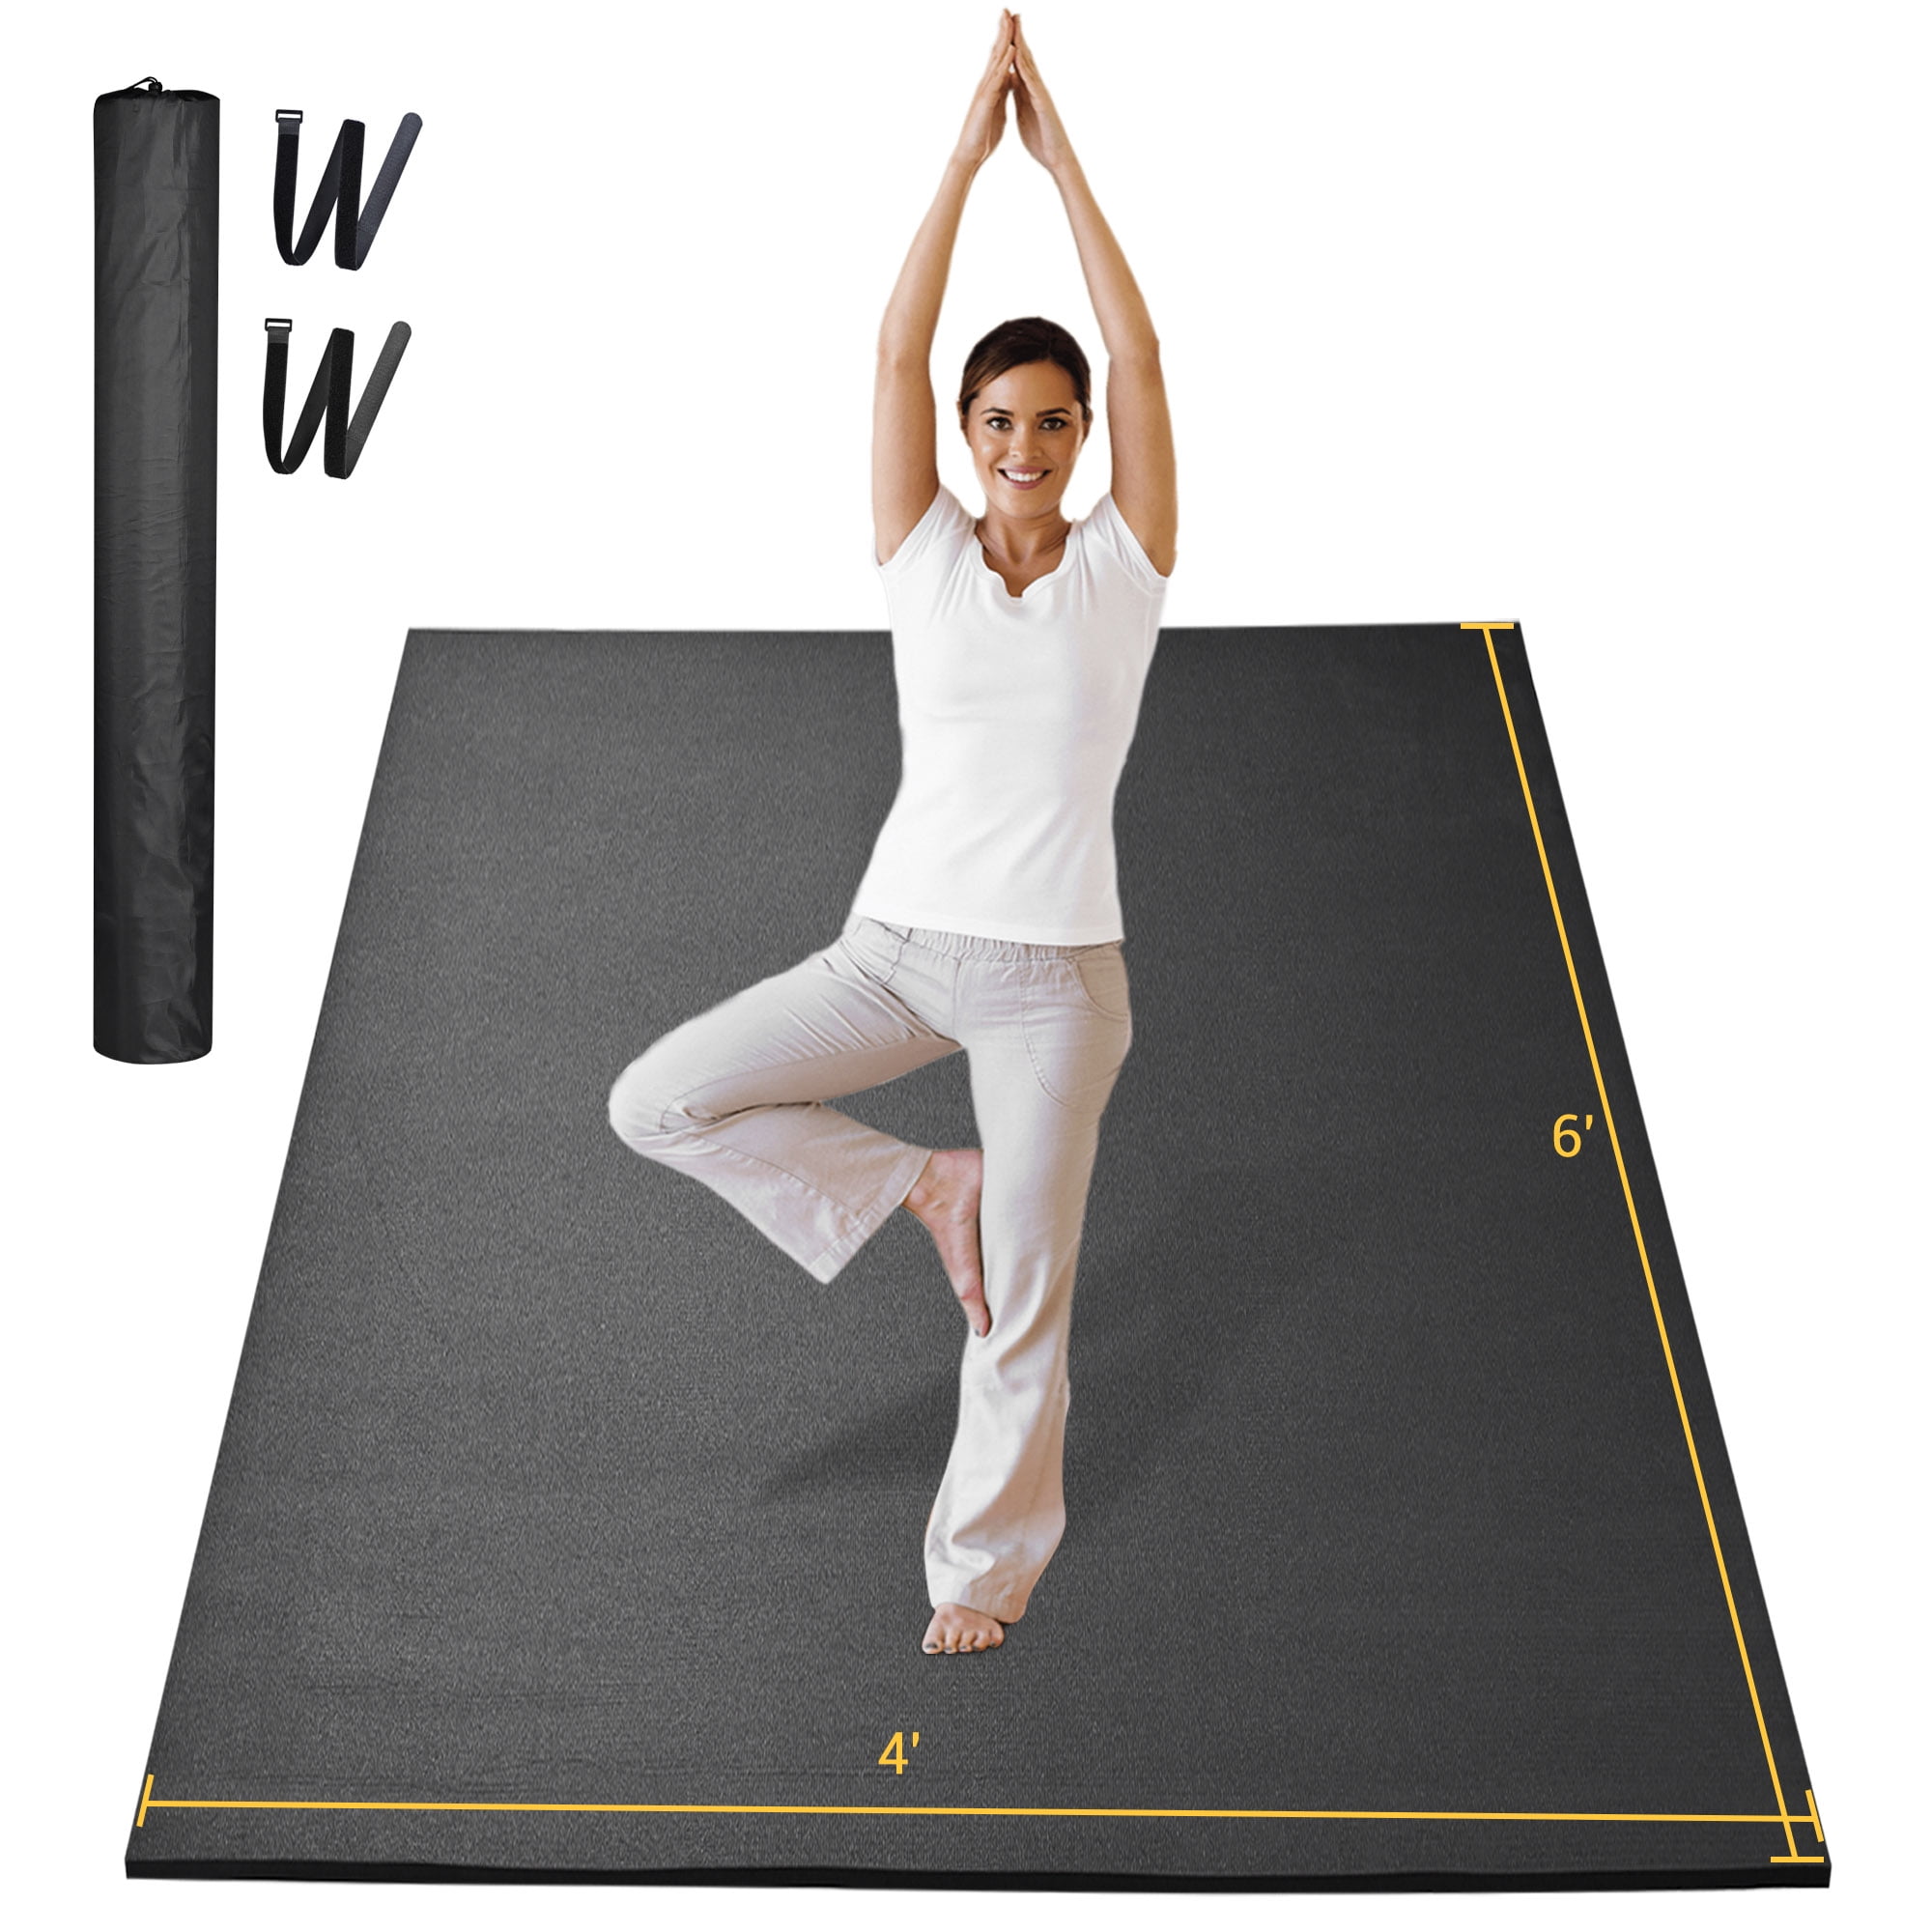 Non-slip Mat for Any Home Gym Workout Equipment - HomeFitnessCode - US